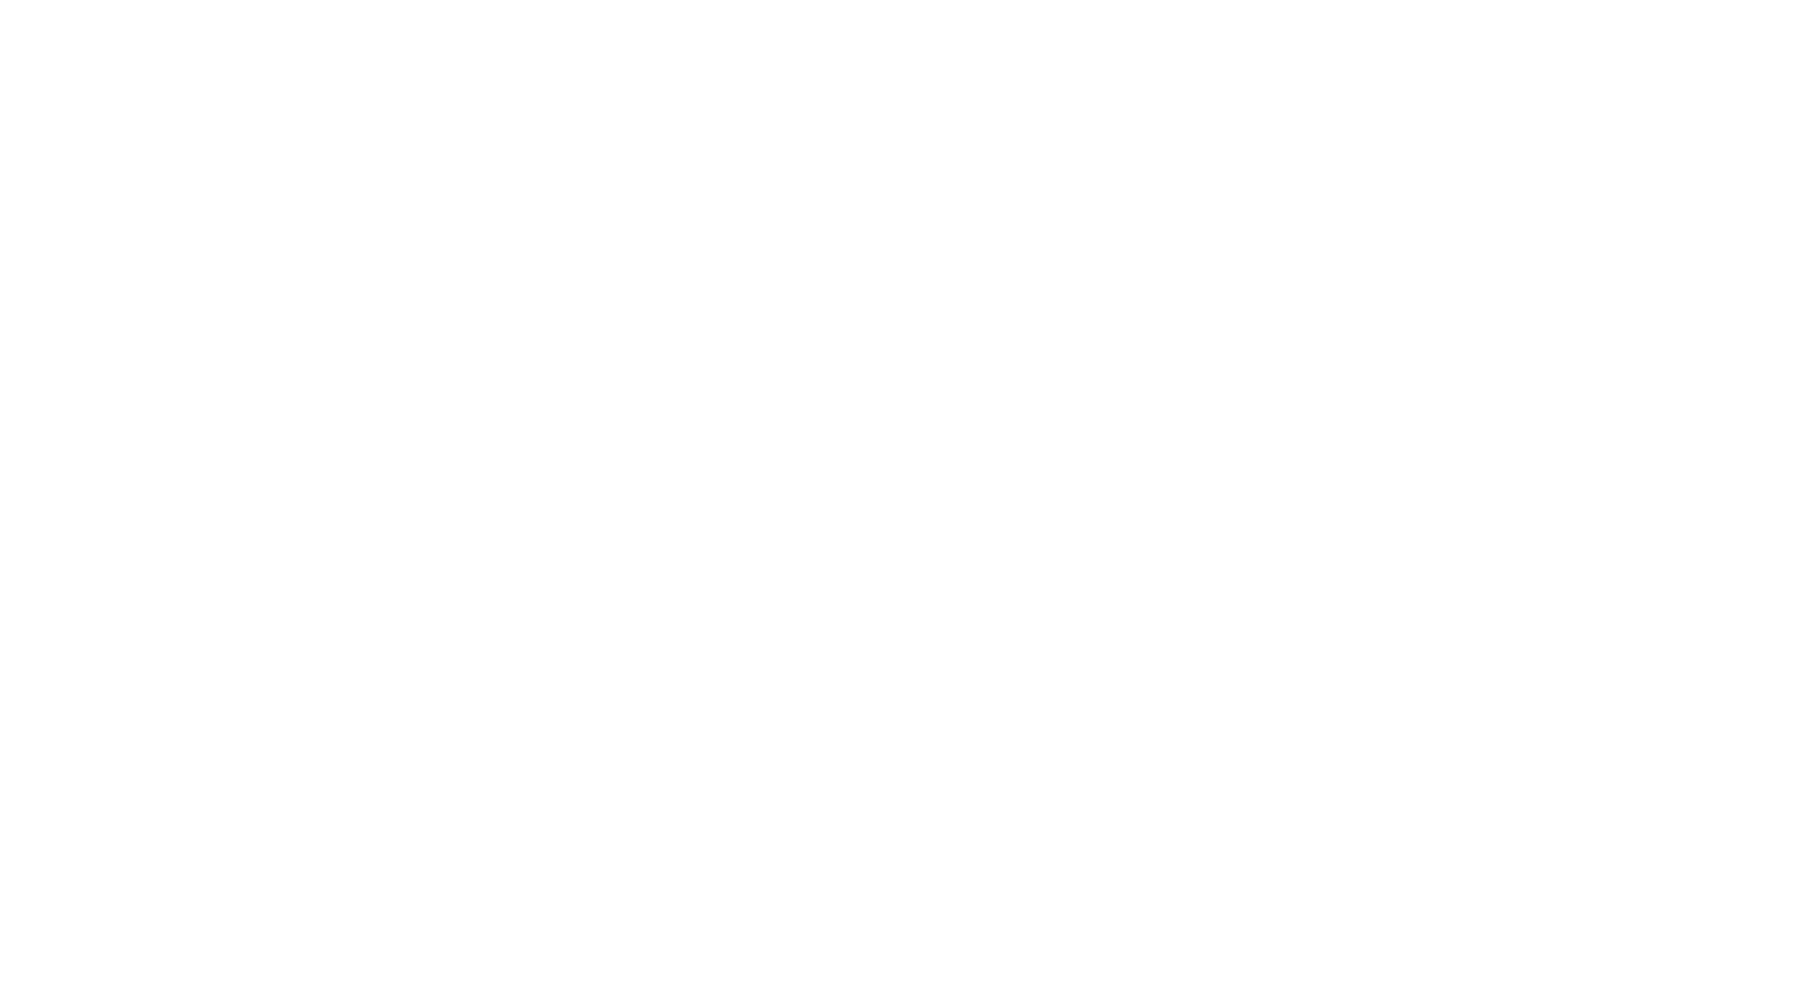 Ted Schwerzler of Twins Daily reviewed The Ball Park in Minnesota.